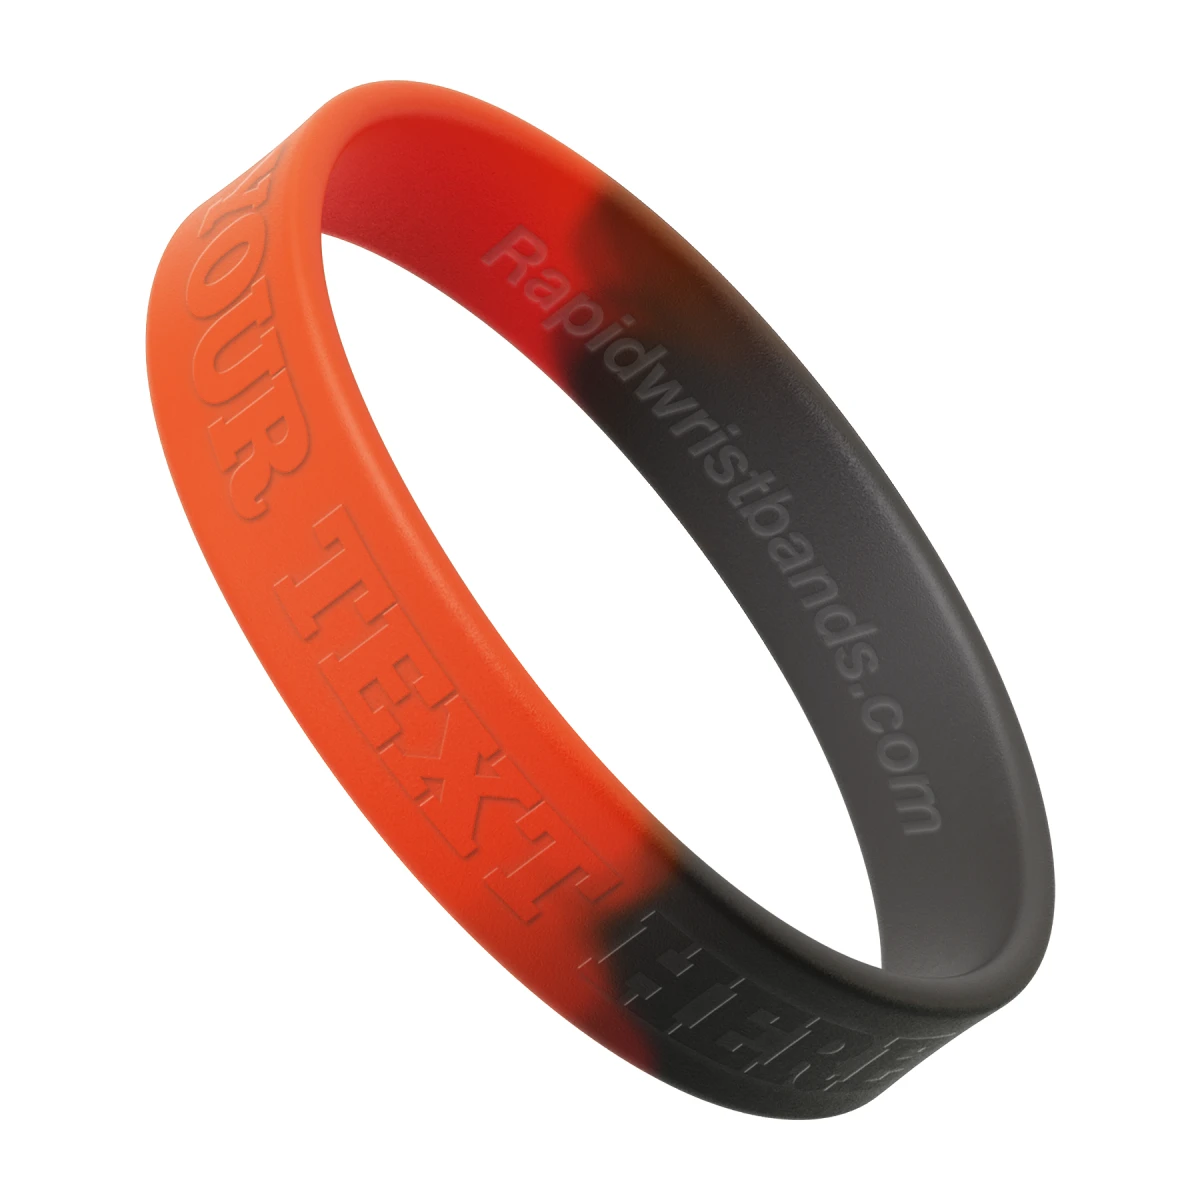 Segmented Orange/Black Wristband With Your Text Here Embossed